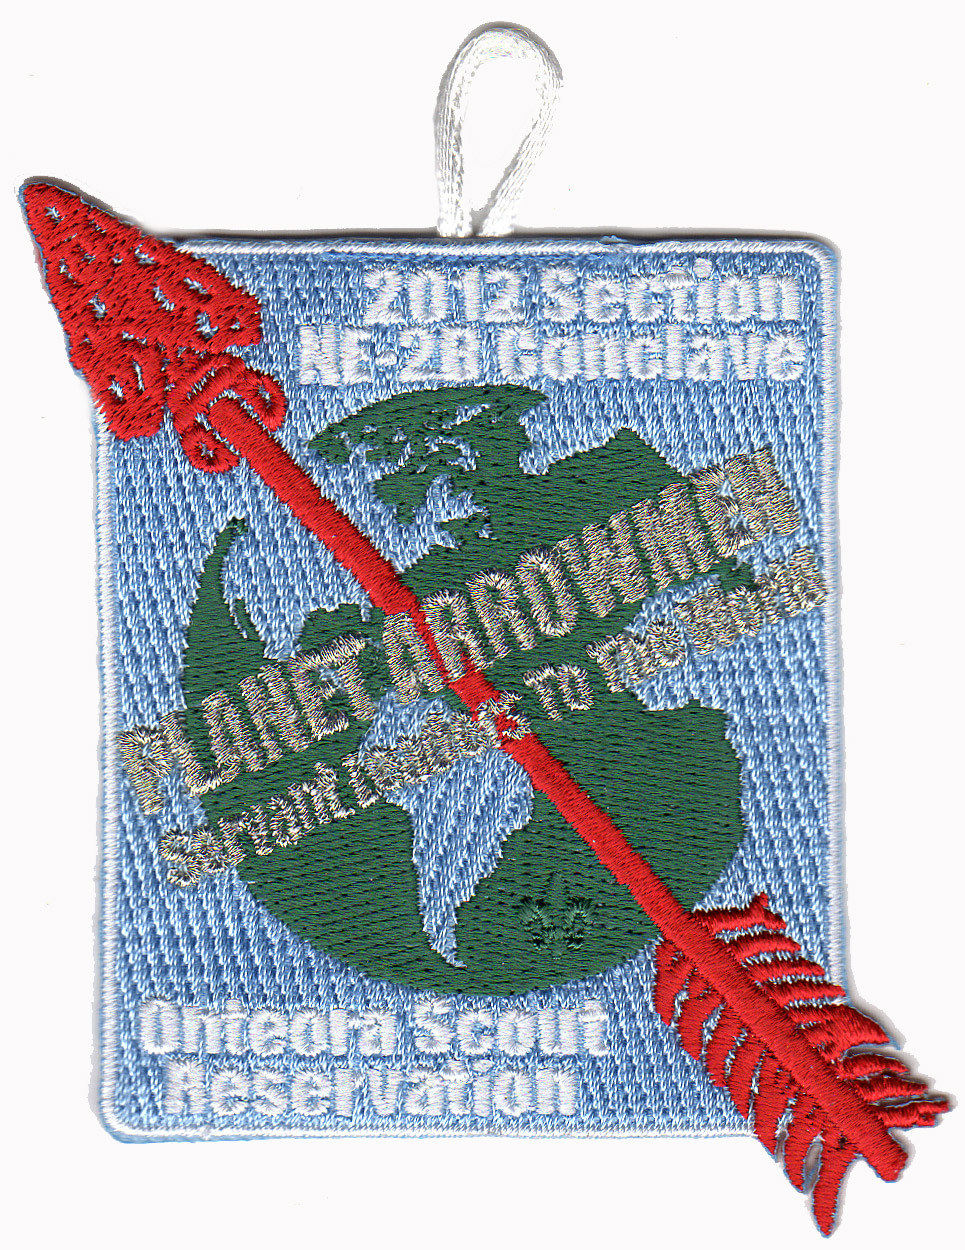 Order of the Arrow NE-2B Conclave 2012